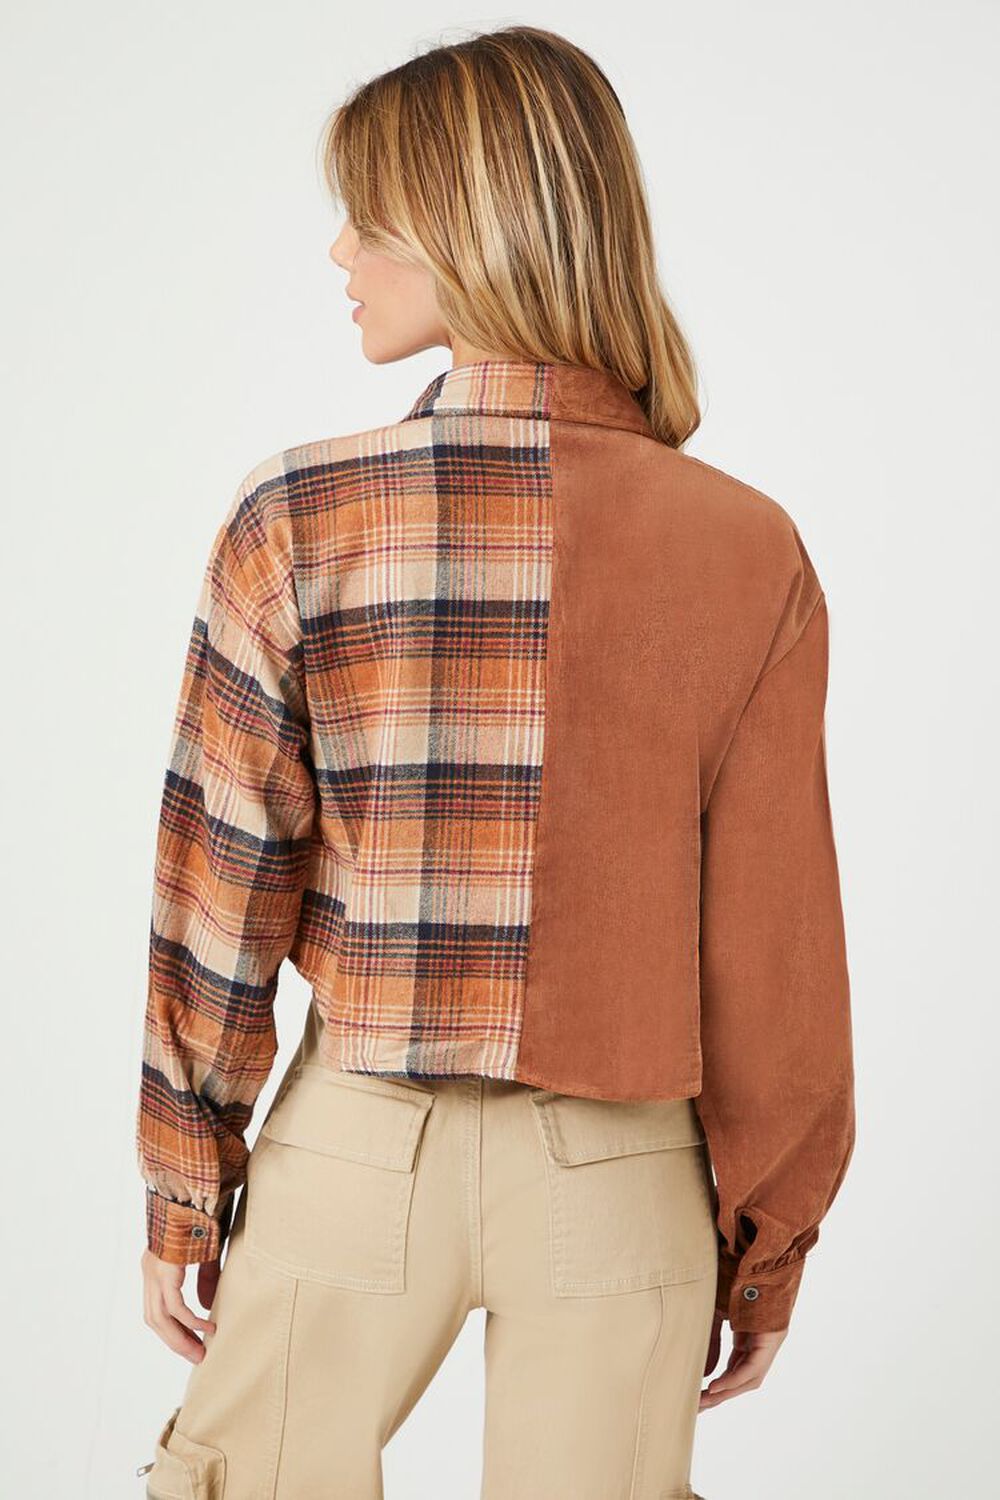 BROWN/MULTI Plaid Flannel Cropped Shirt, image 3